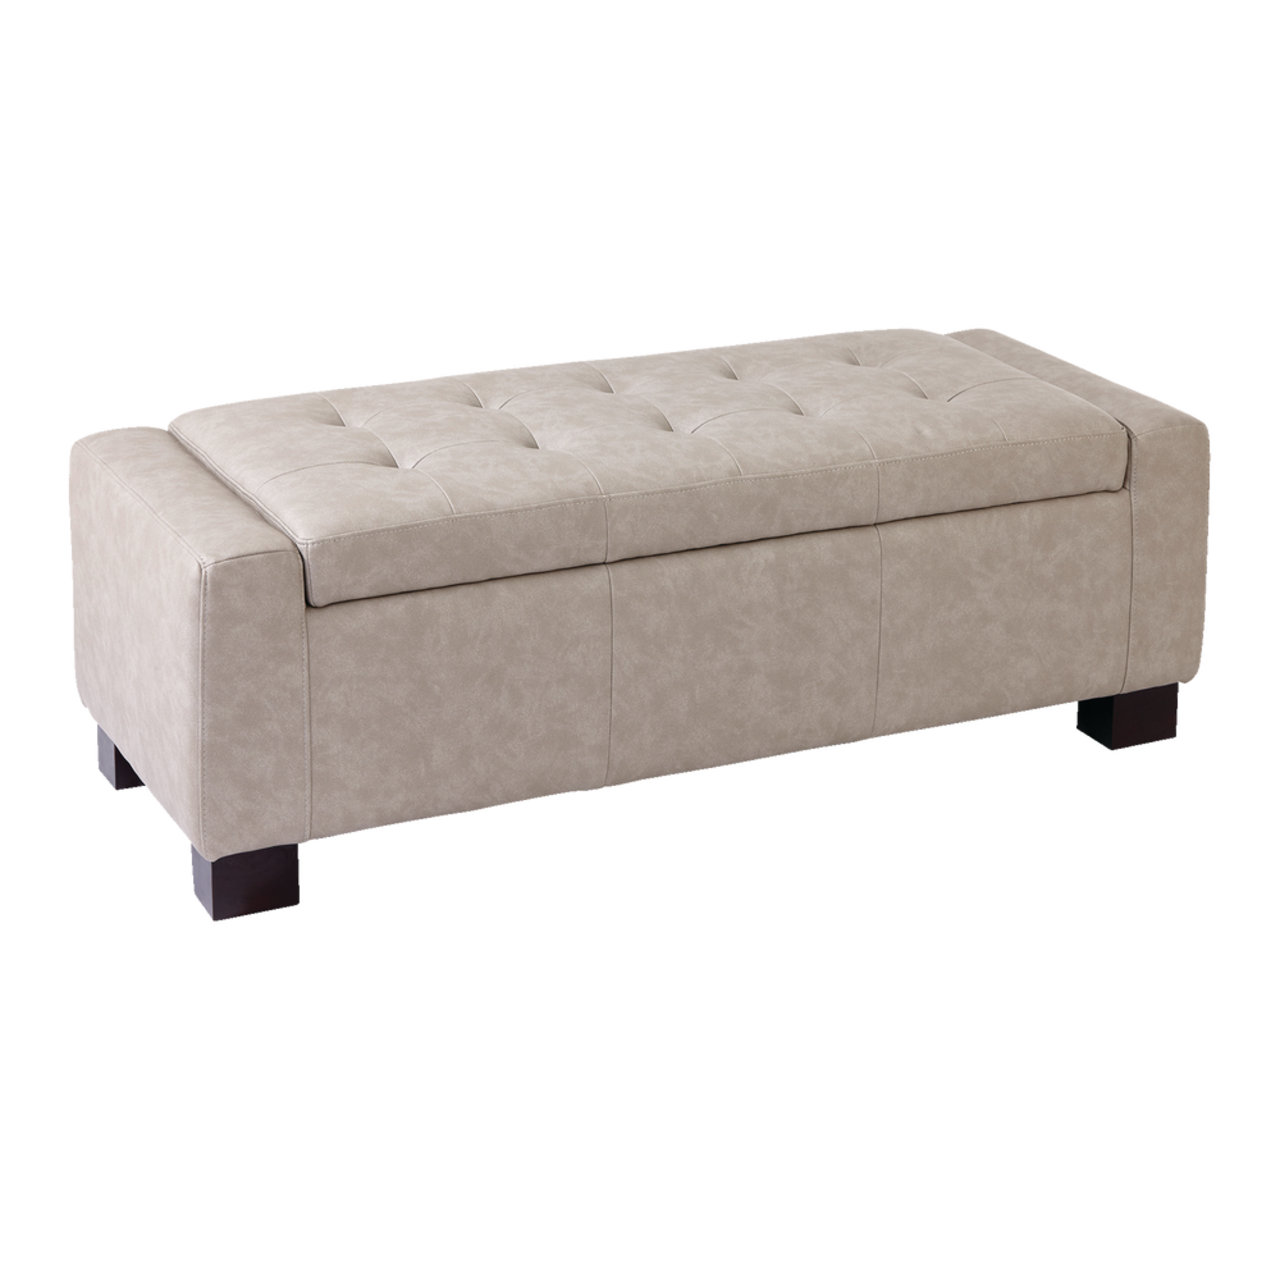 CANVAS Louisa Upholstered Hinge-Top Storage Ottoman/Bench With